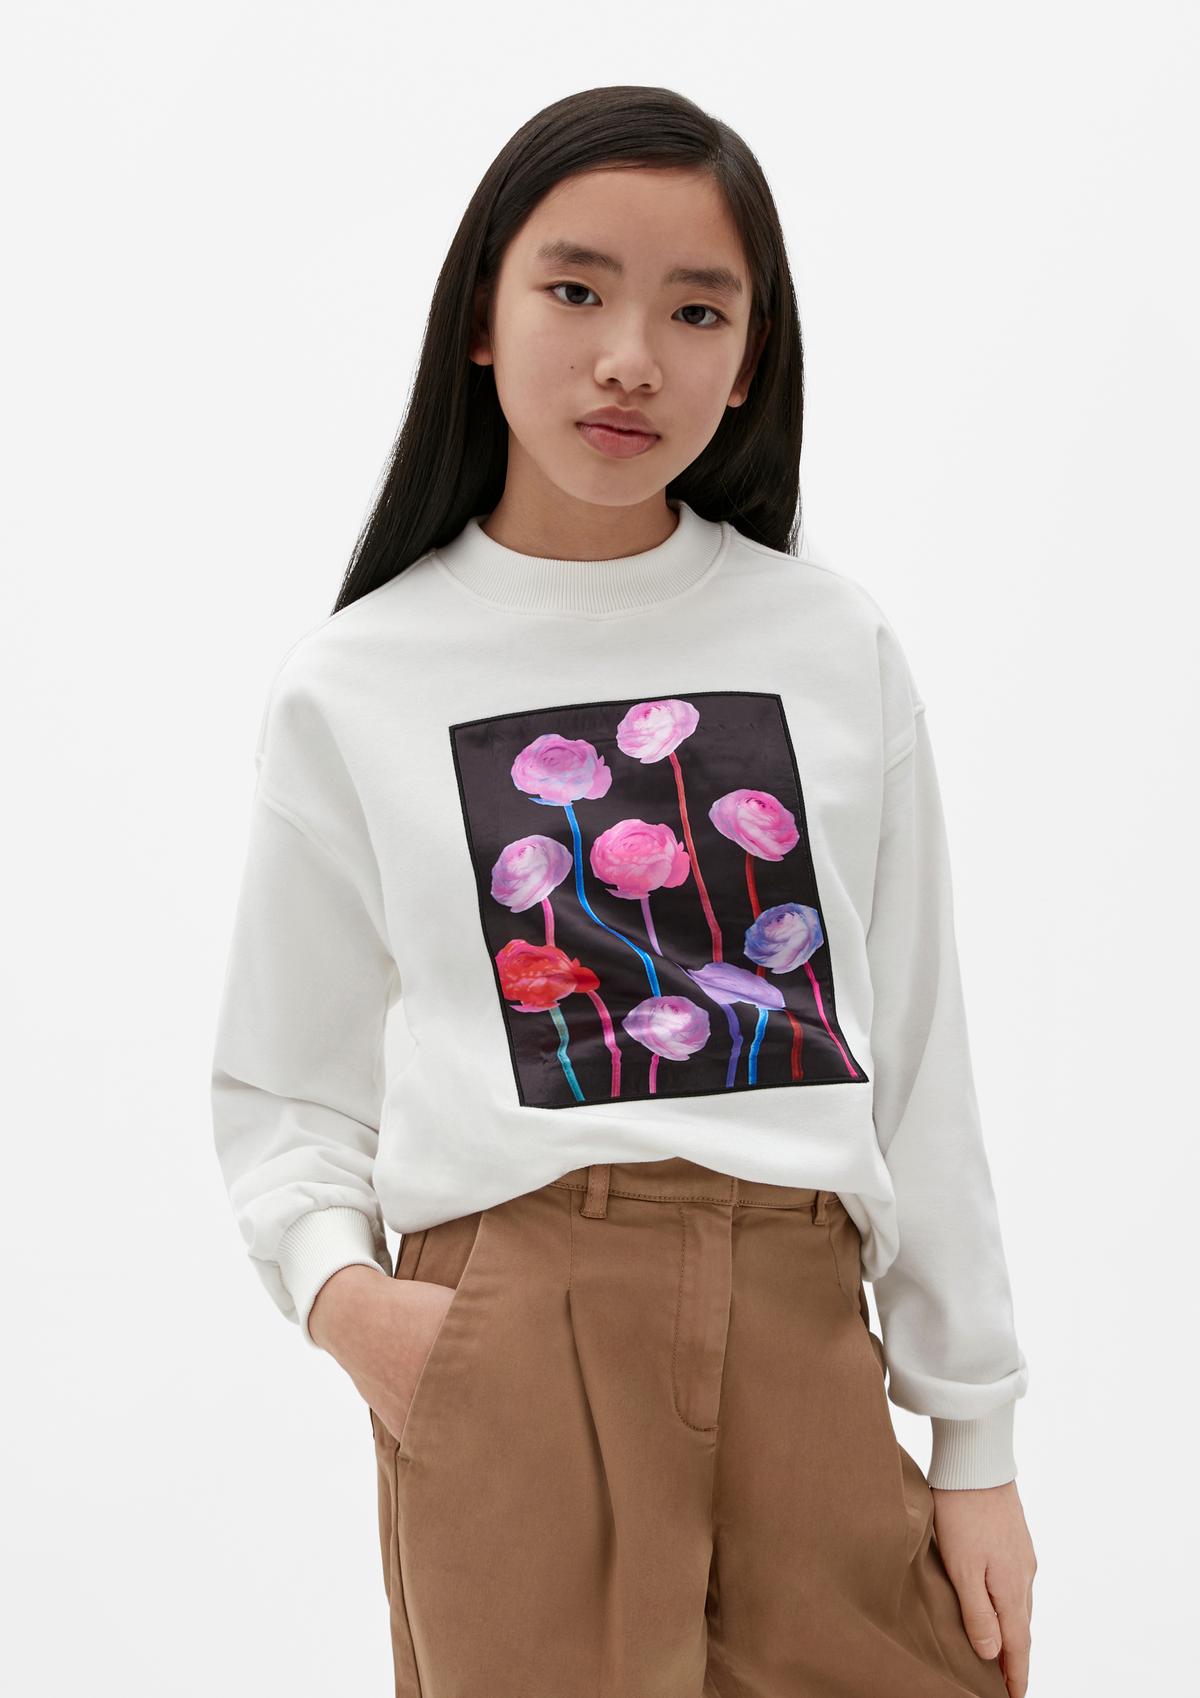 s.Oliver Sweatshirt with a shiny appliqué